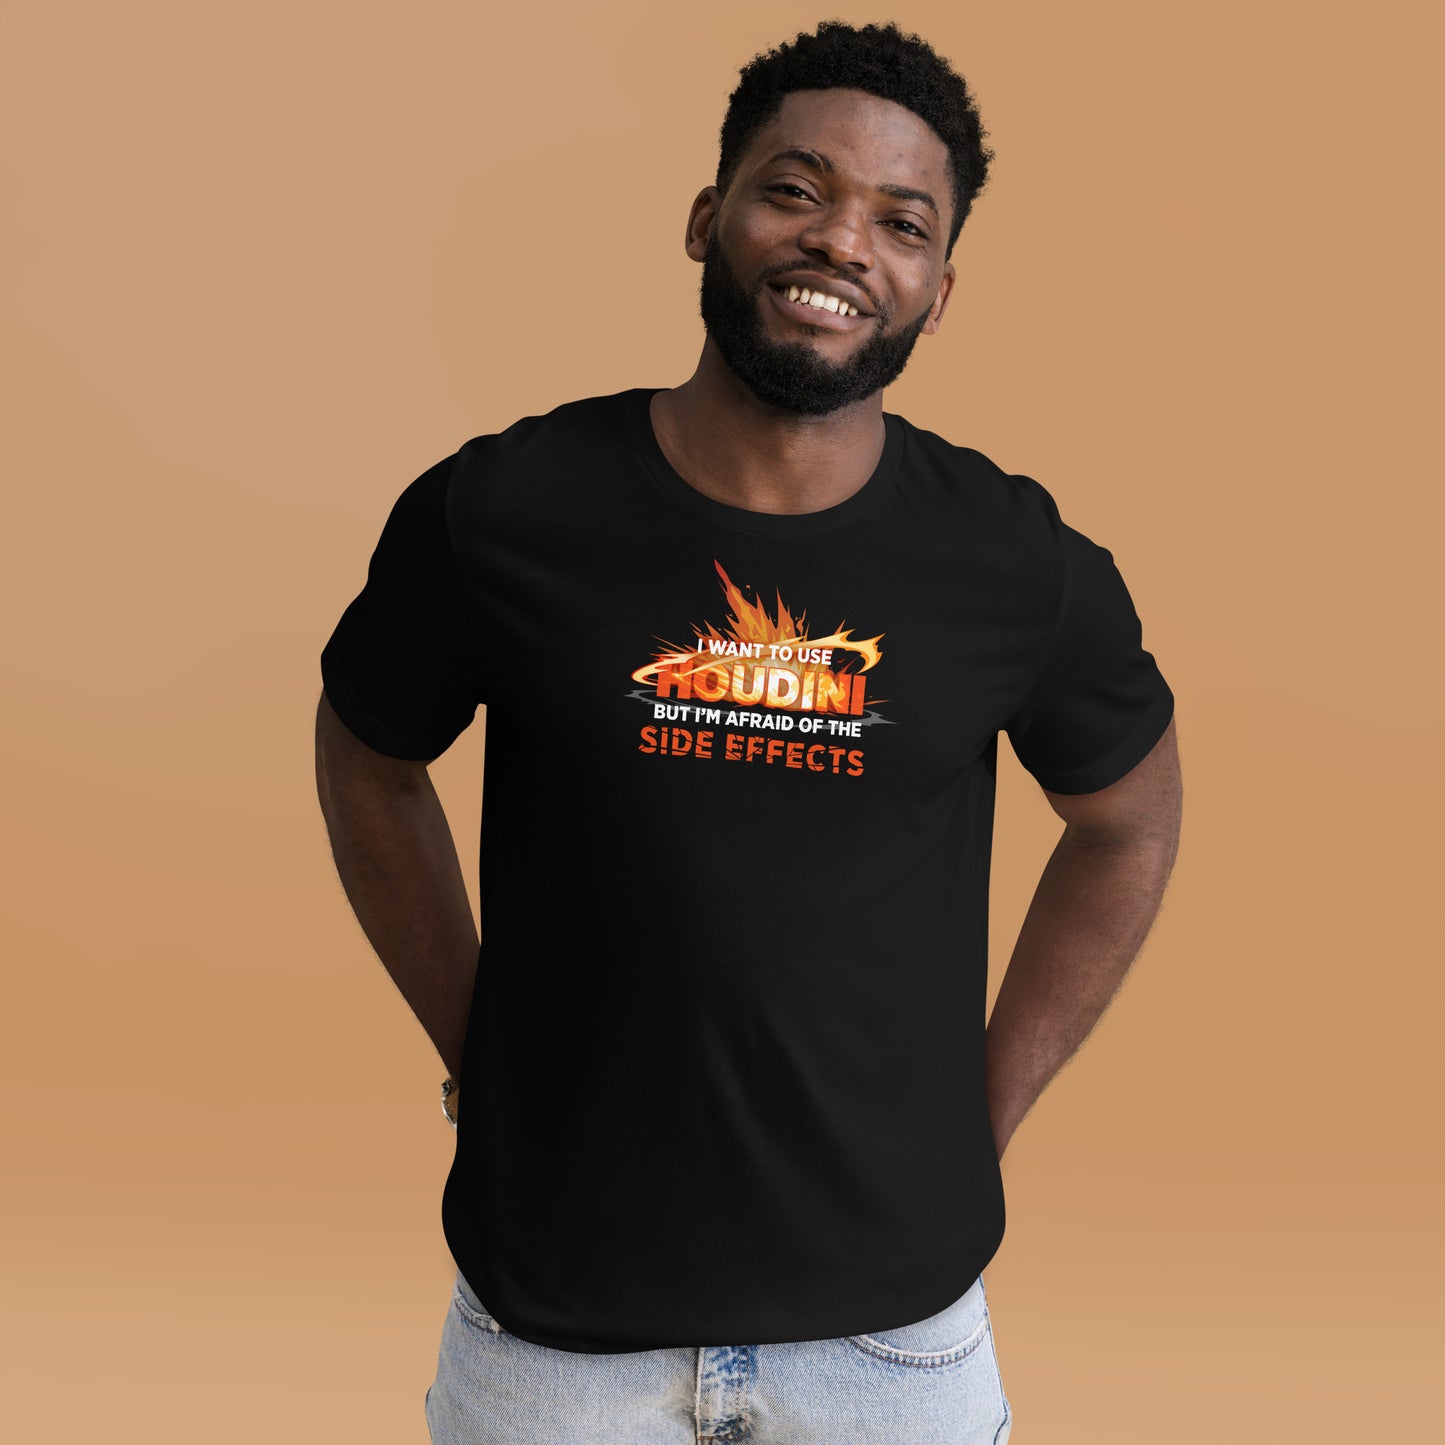 I Want to Use Houdini, But I'm Afraid of the Side Effects T-Shirt